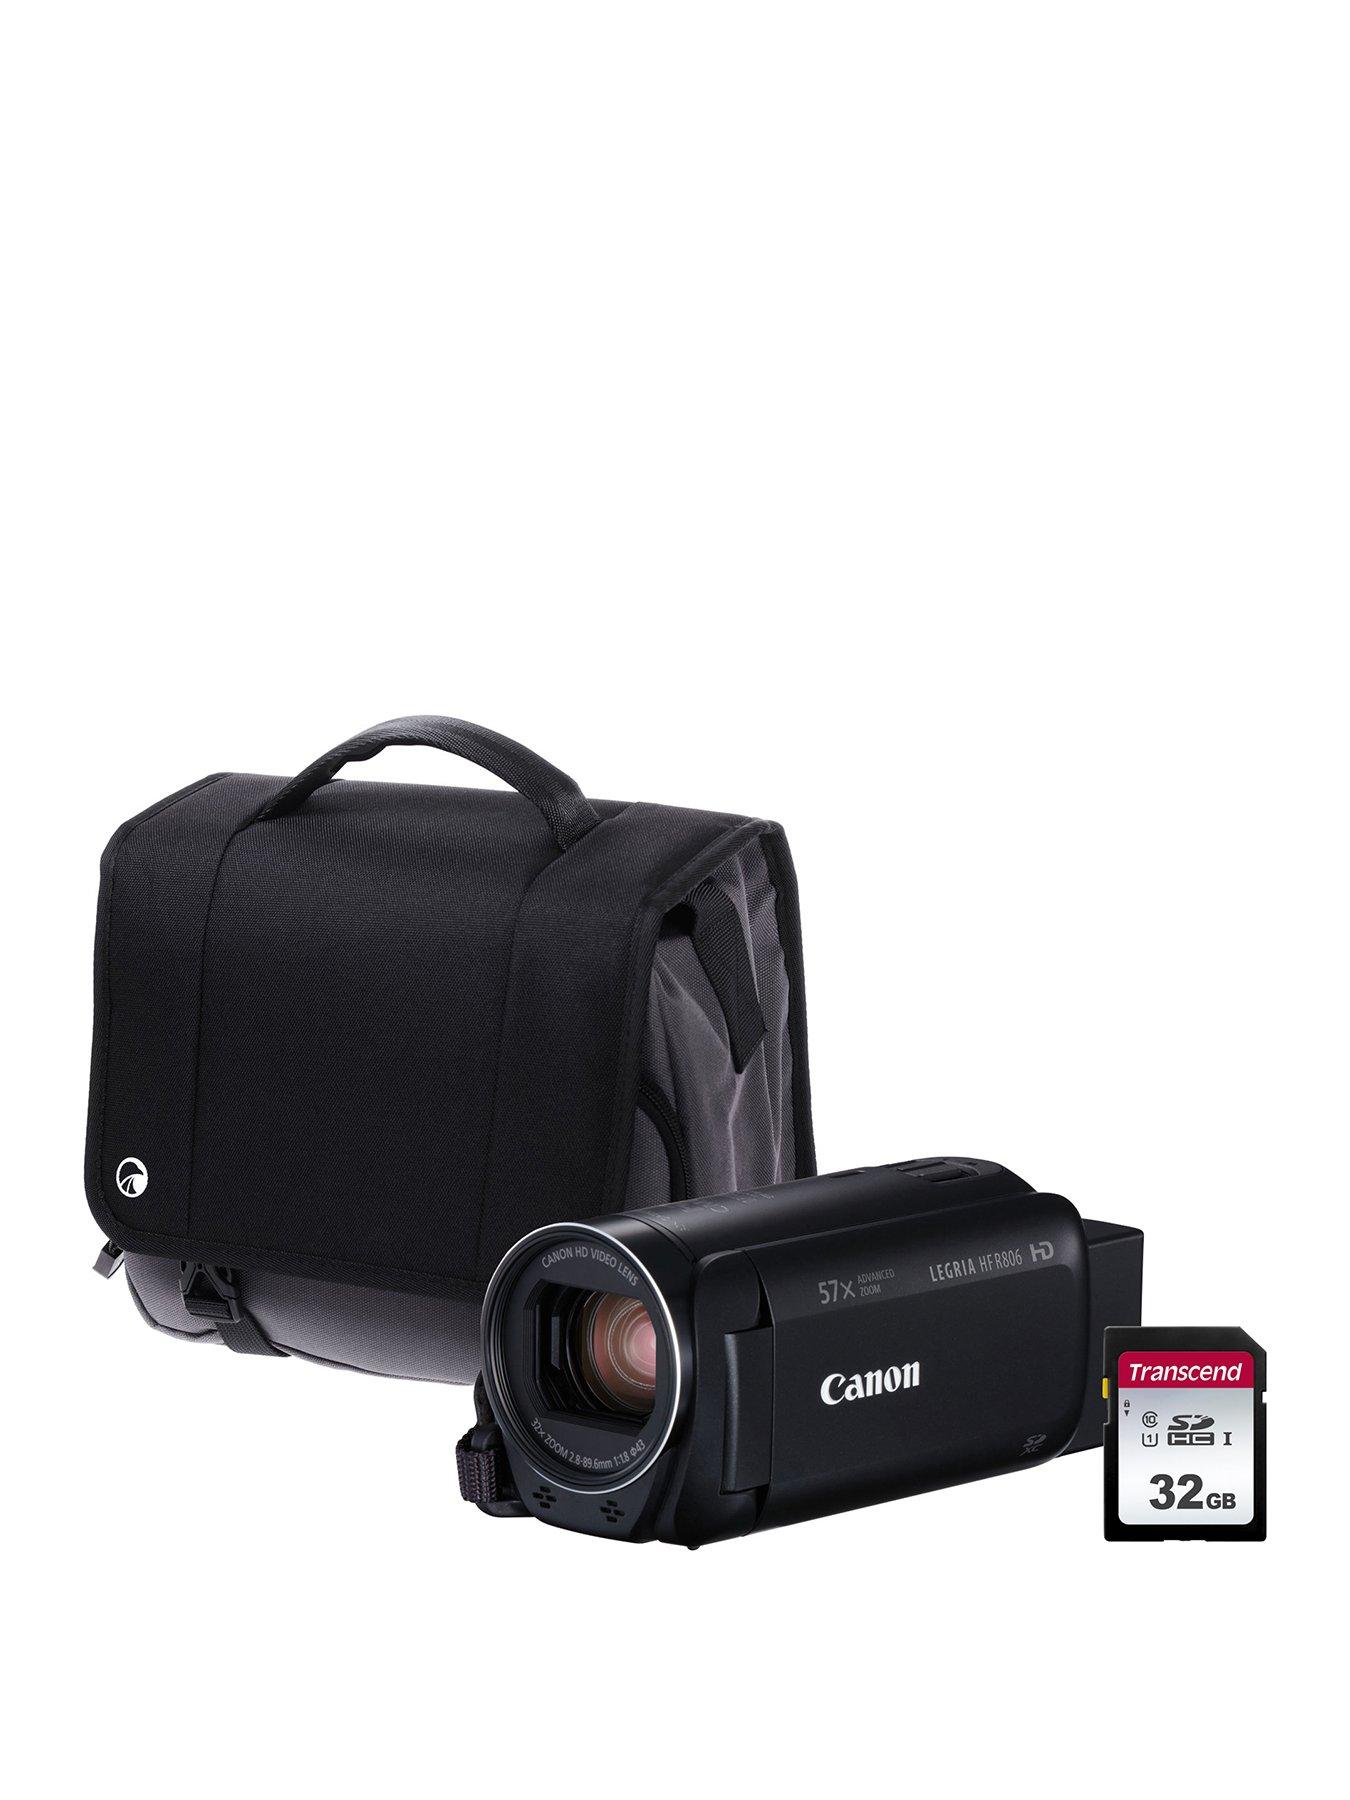 Canon Legria Hf R806 Camcorder Kit Inc 32Gb Sd Card And Case – Black